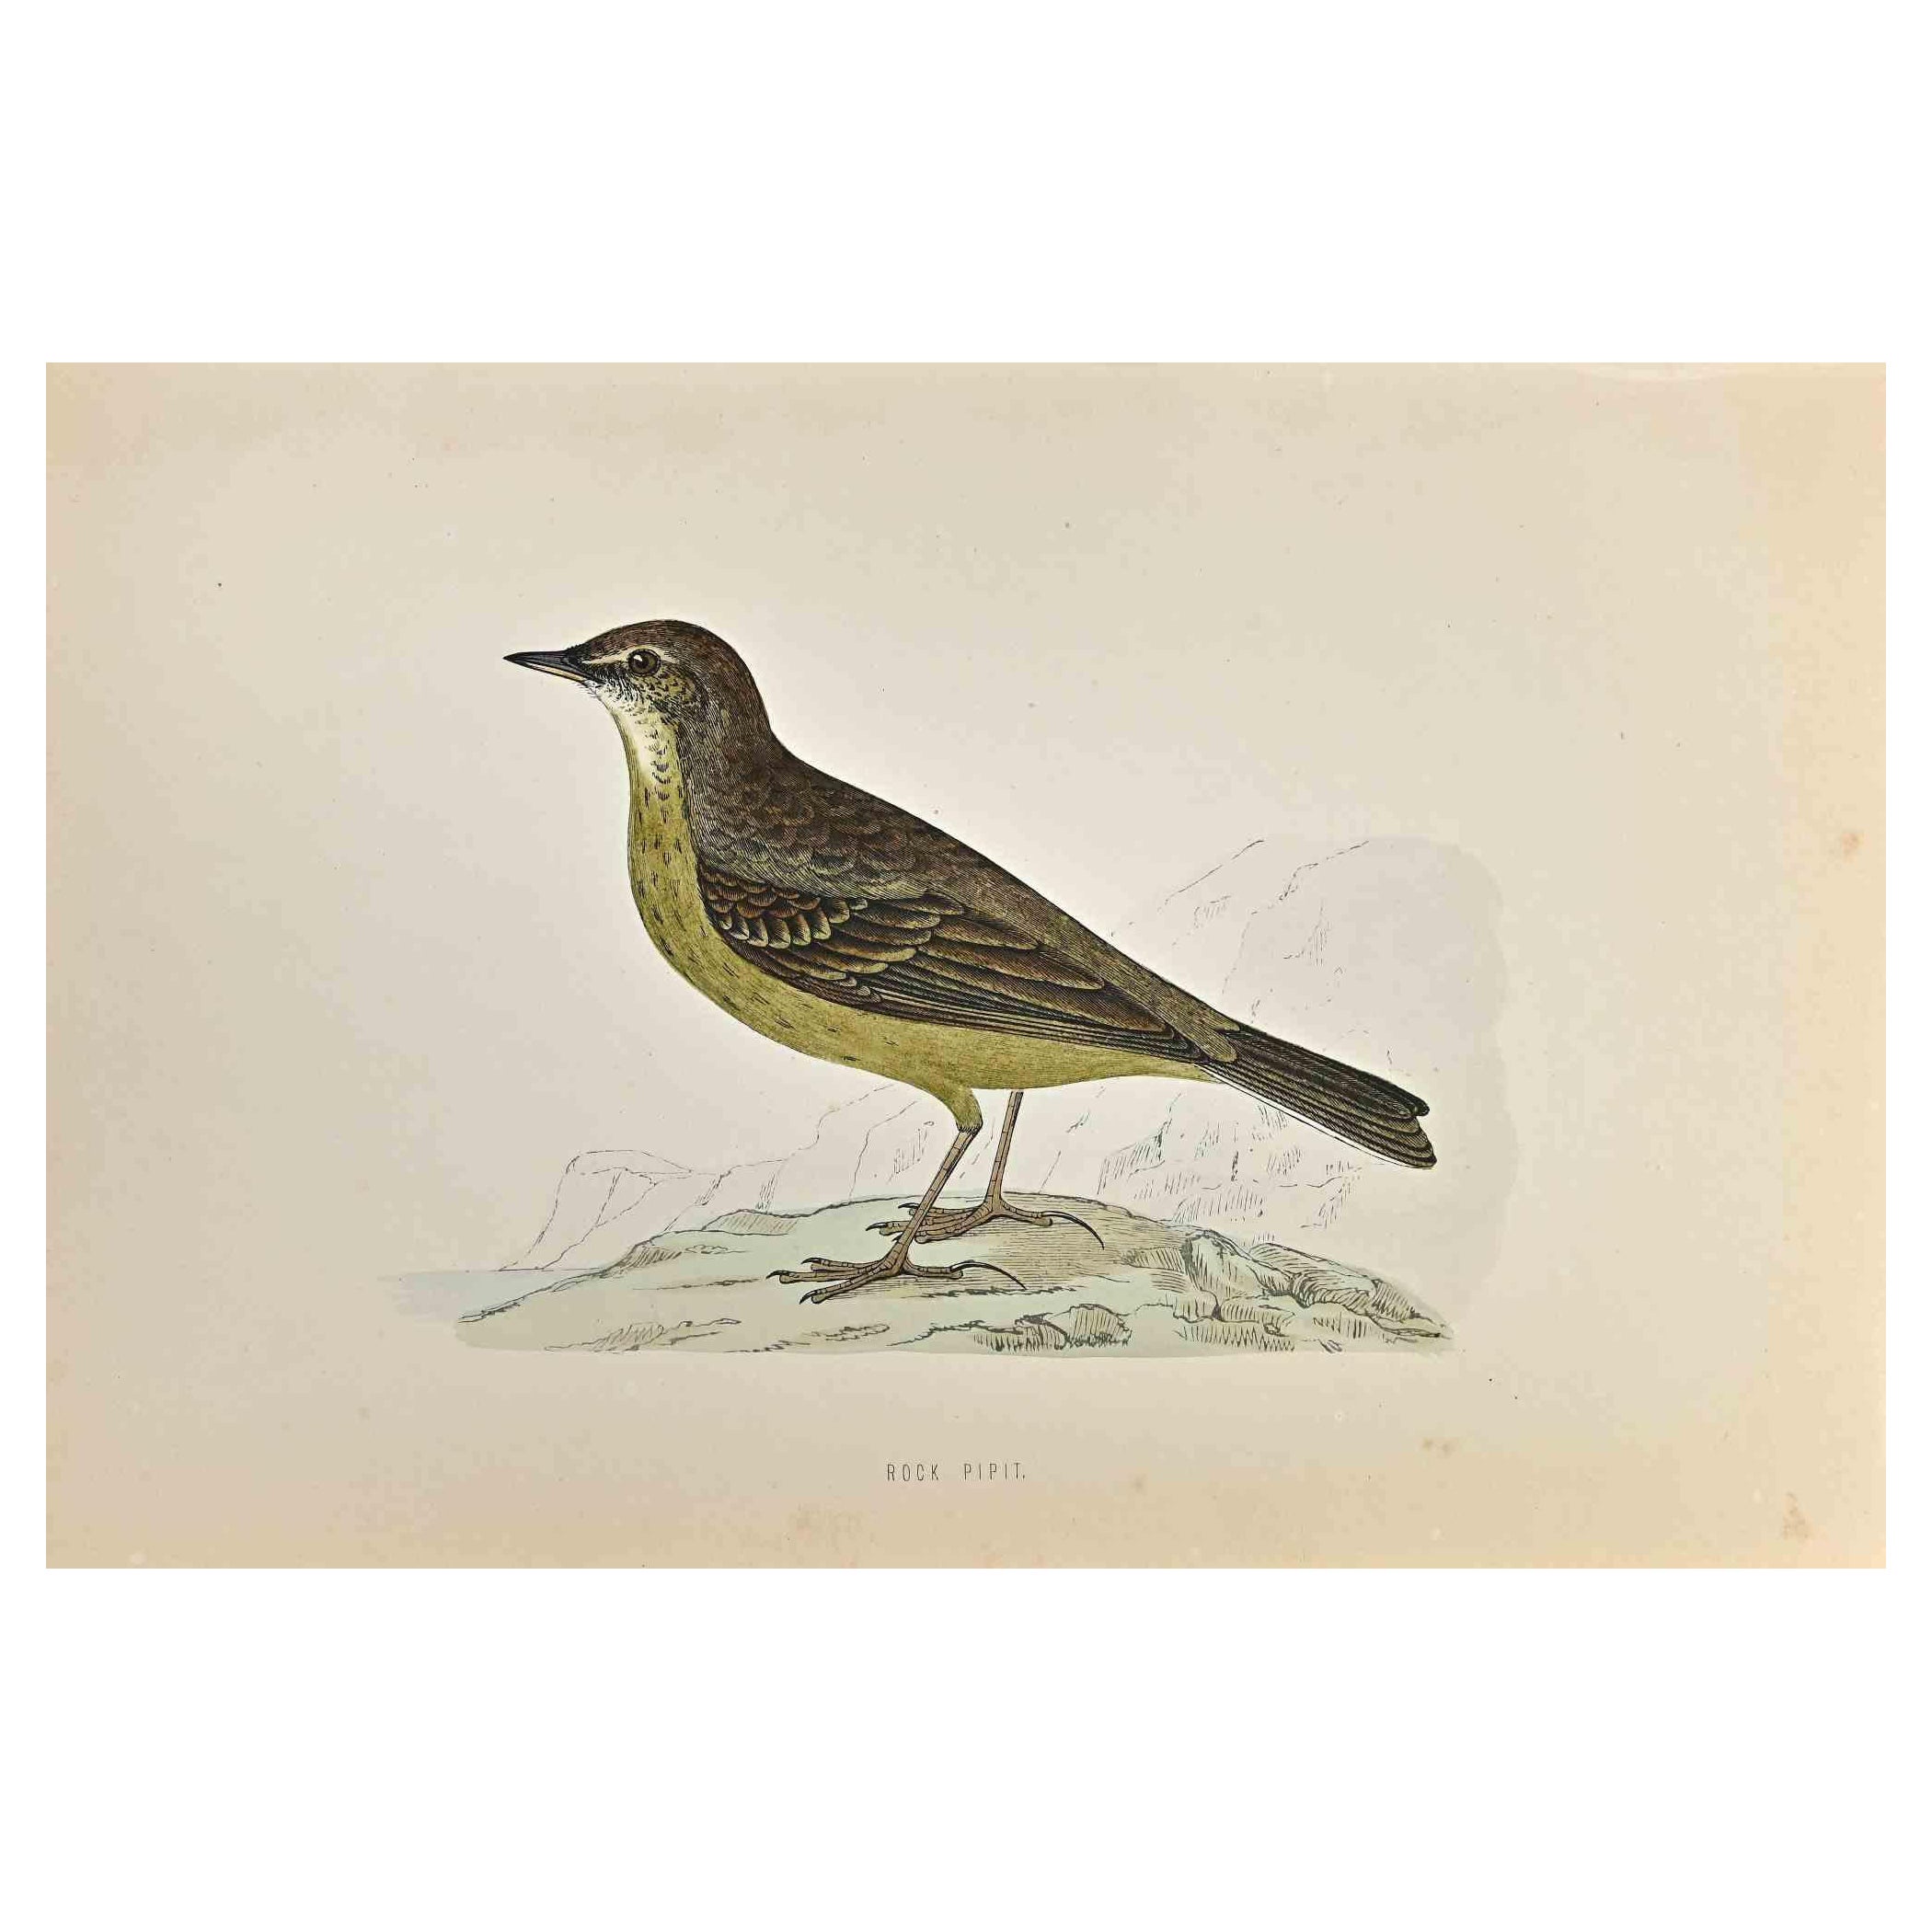 Rock Pipit is a modern artwork realized in 1870 by the British artist Alexander Francis Lydon (1836-1917) . 

Woodcut print, hand colored, published by London, Bell & Sons, 1870.  Name of the bird printed in plate. This work is part of a print suite